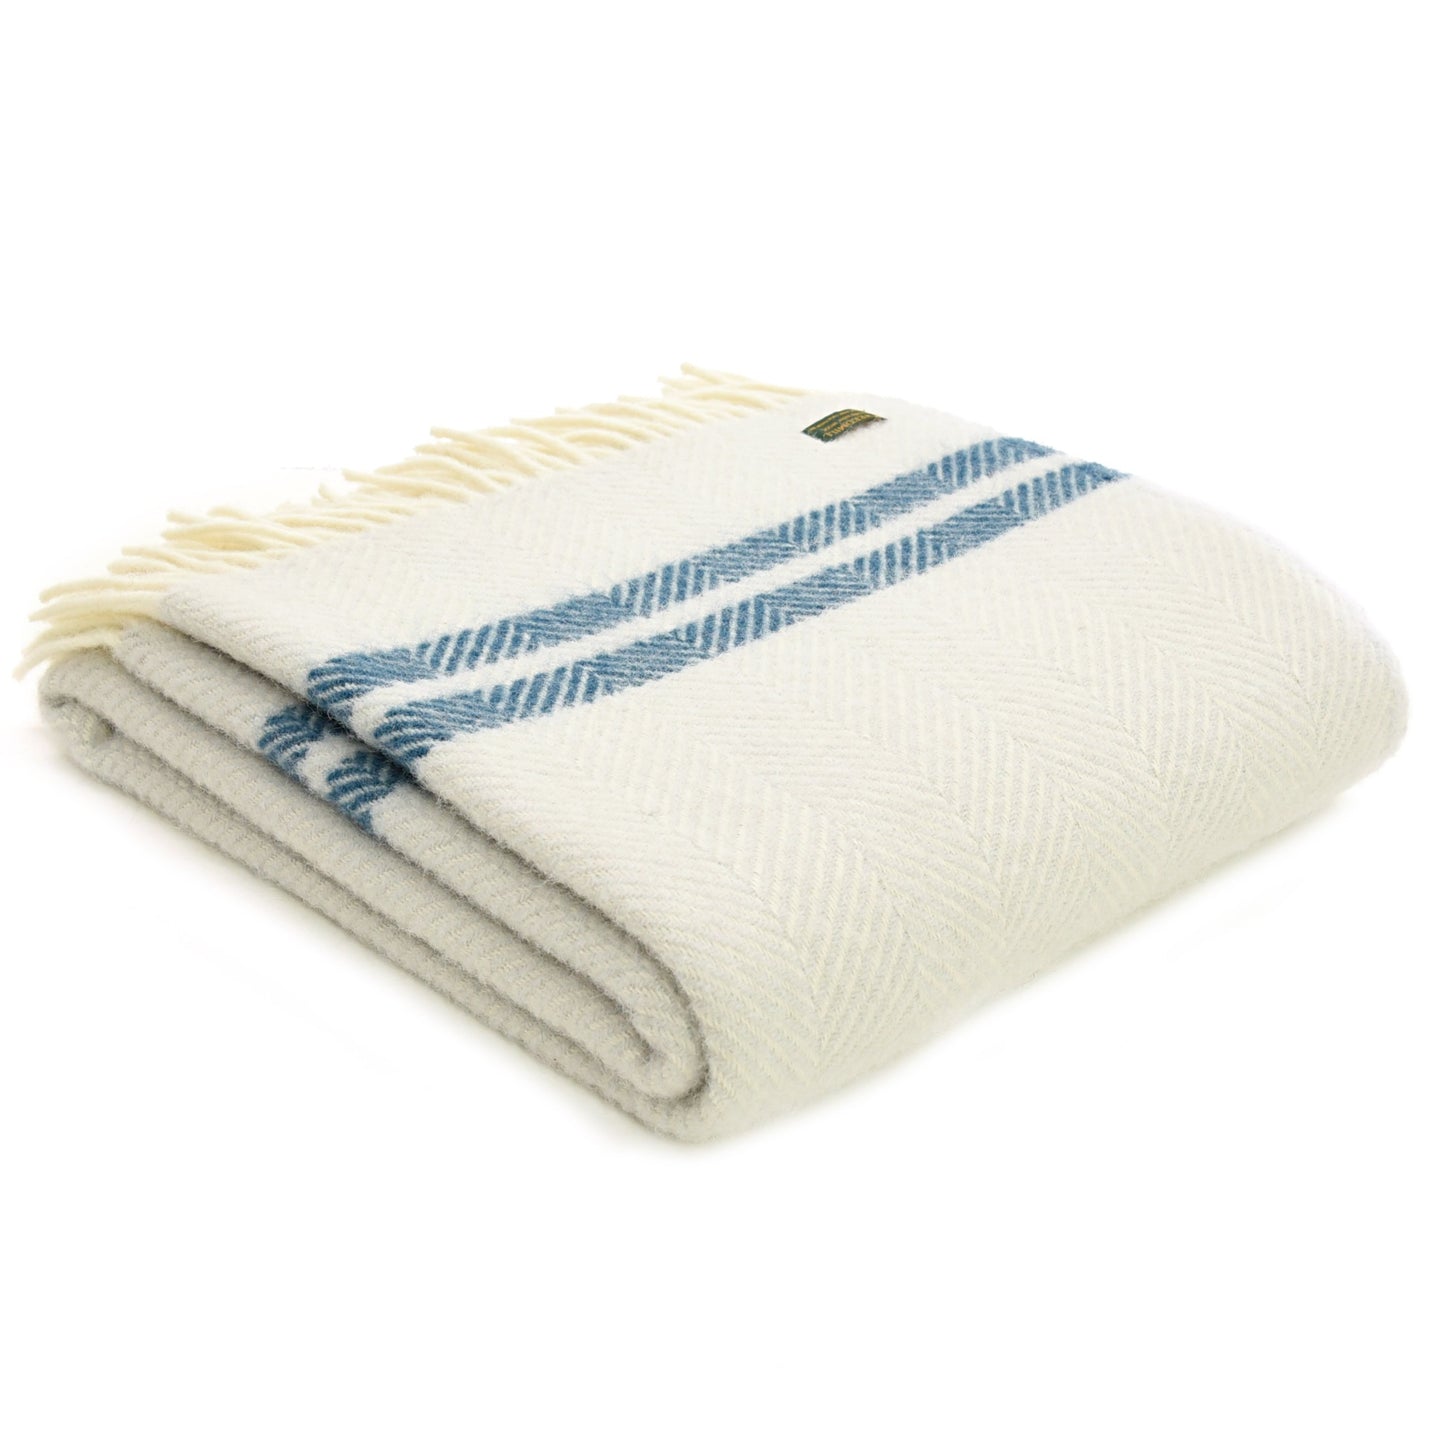 Glacier and Ink Two Stripe Welsh Blanket by Tweedmill